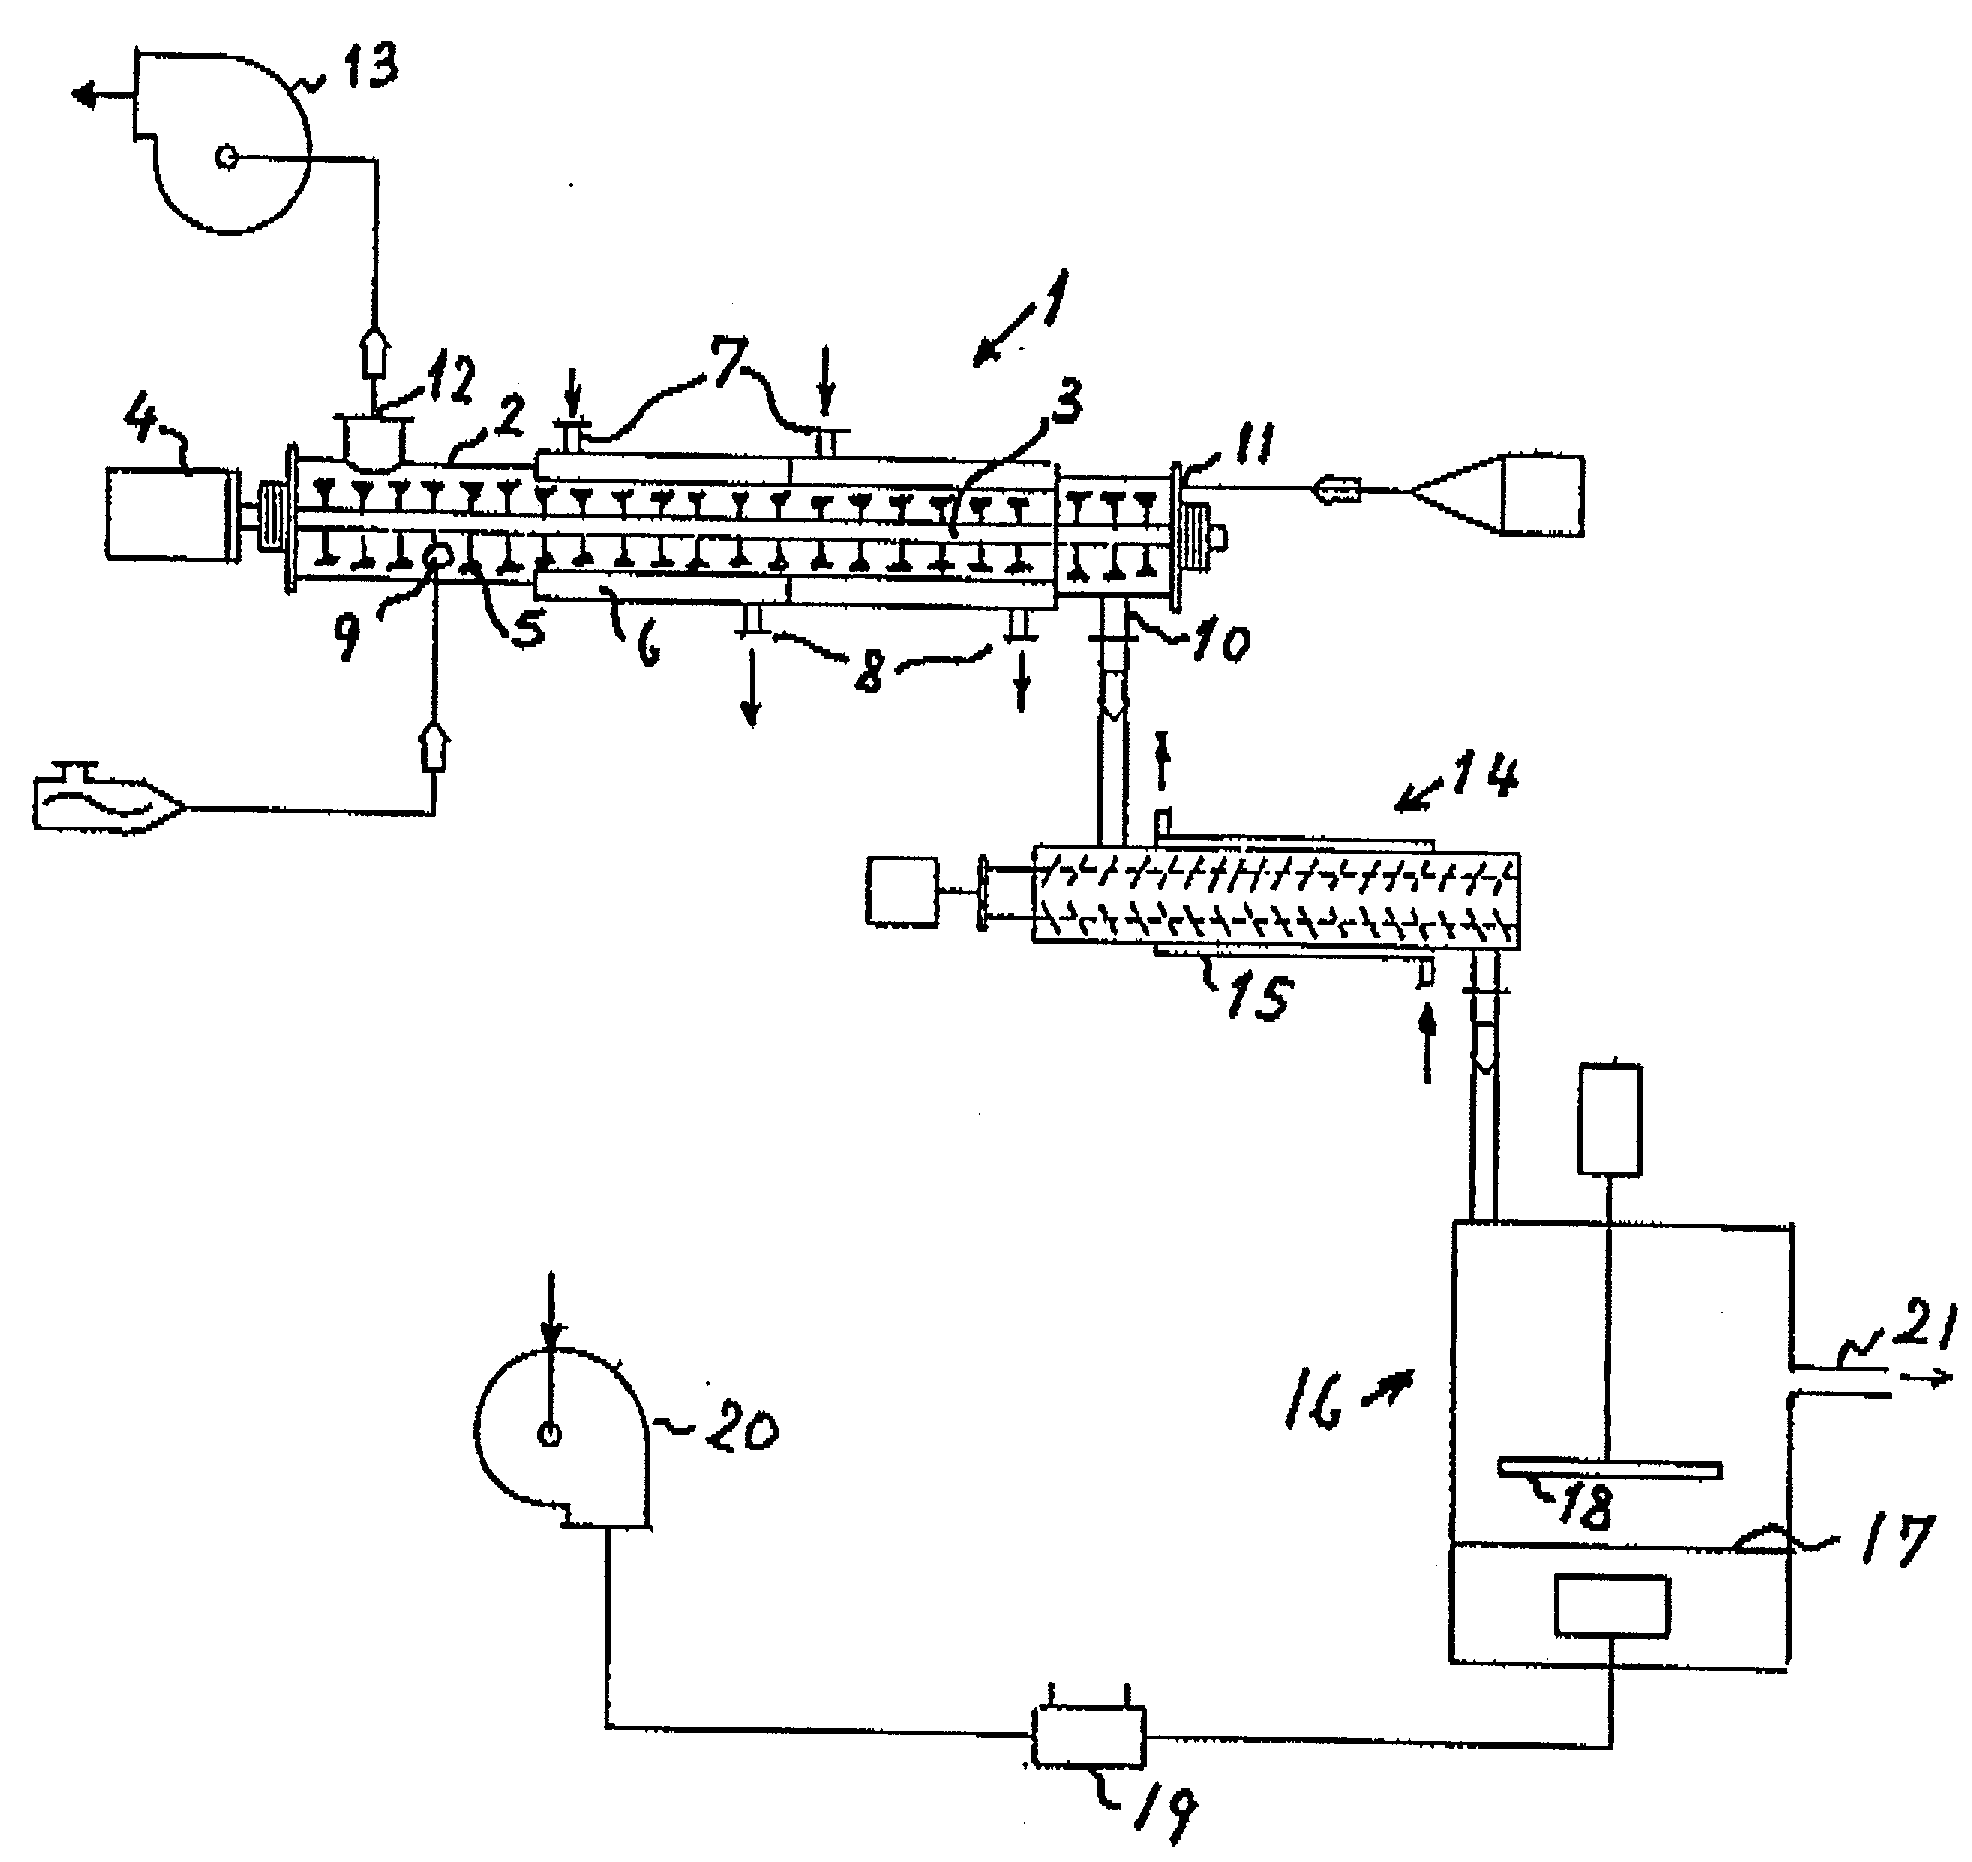 Process and plant for evaporative concentration and crystallization of a viscous lactose-containing aqueous liquid